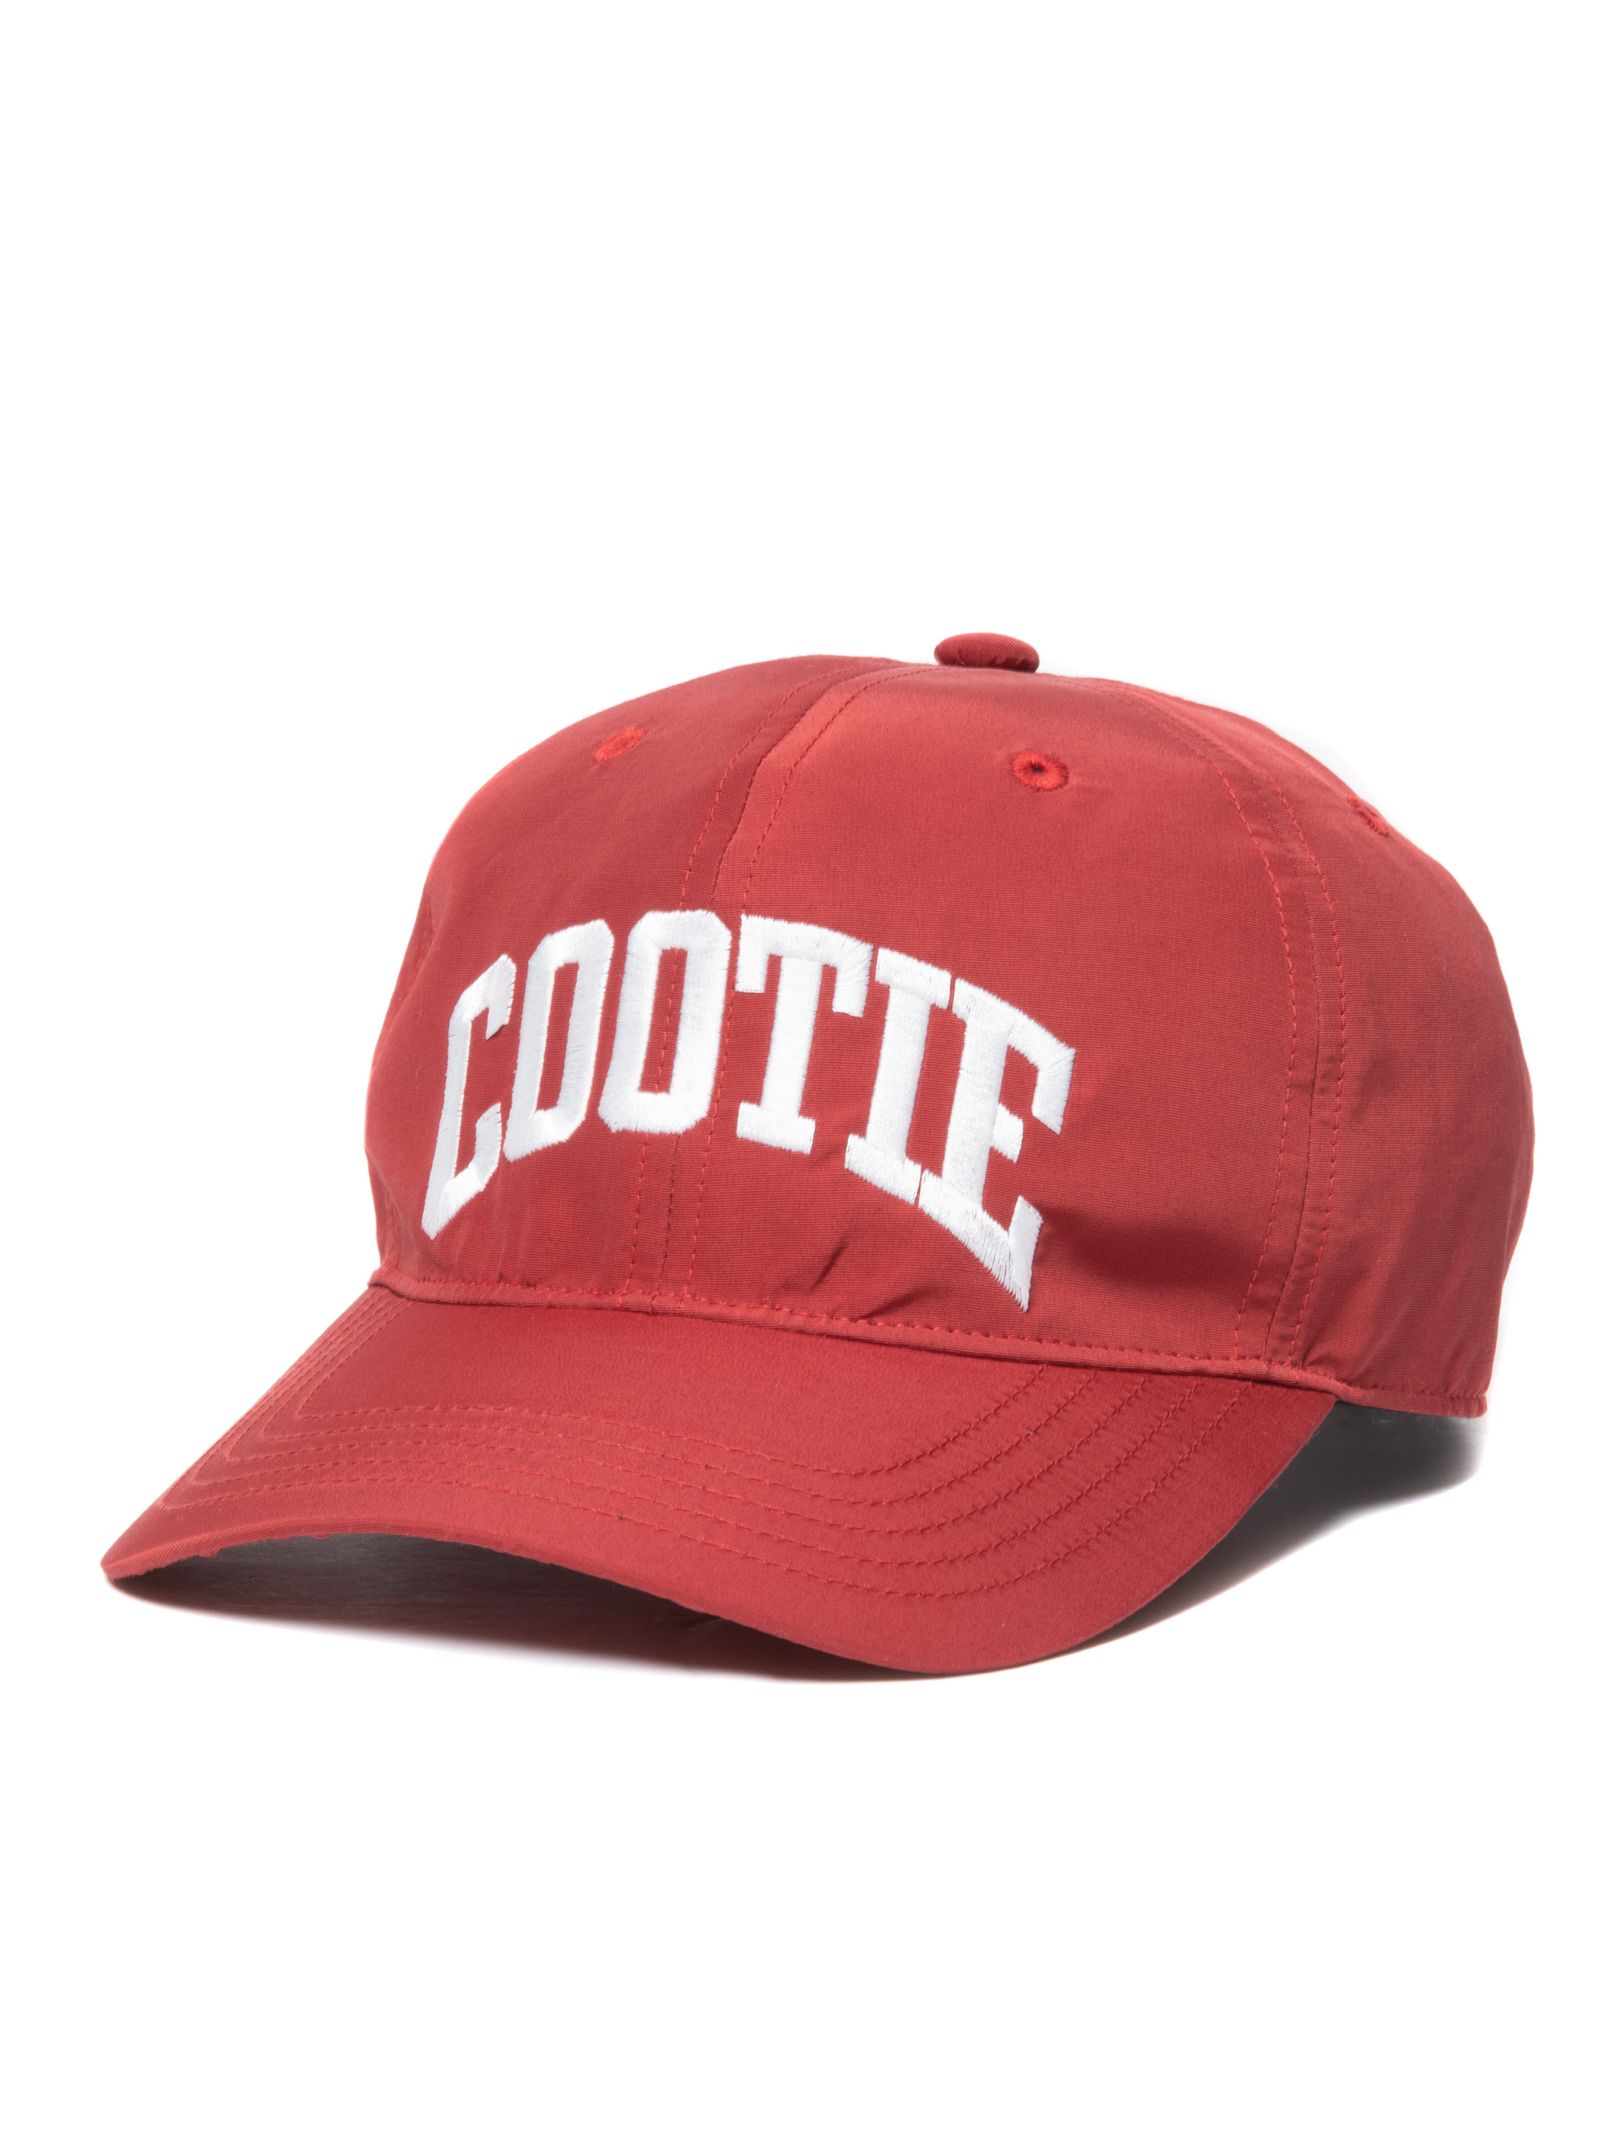 COOTIE PRODUCTIONS - 60/40 Cloth 6 Panel Cap / Red | Stripe